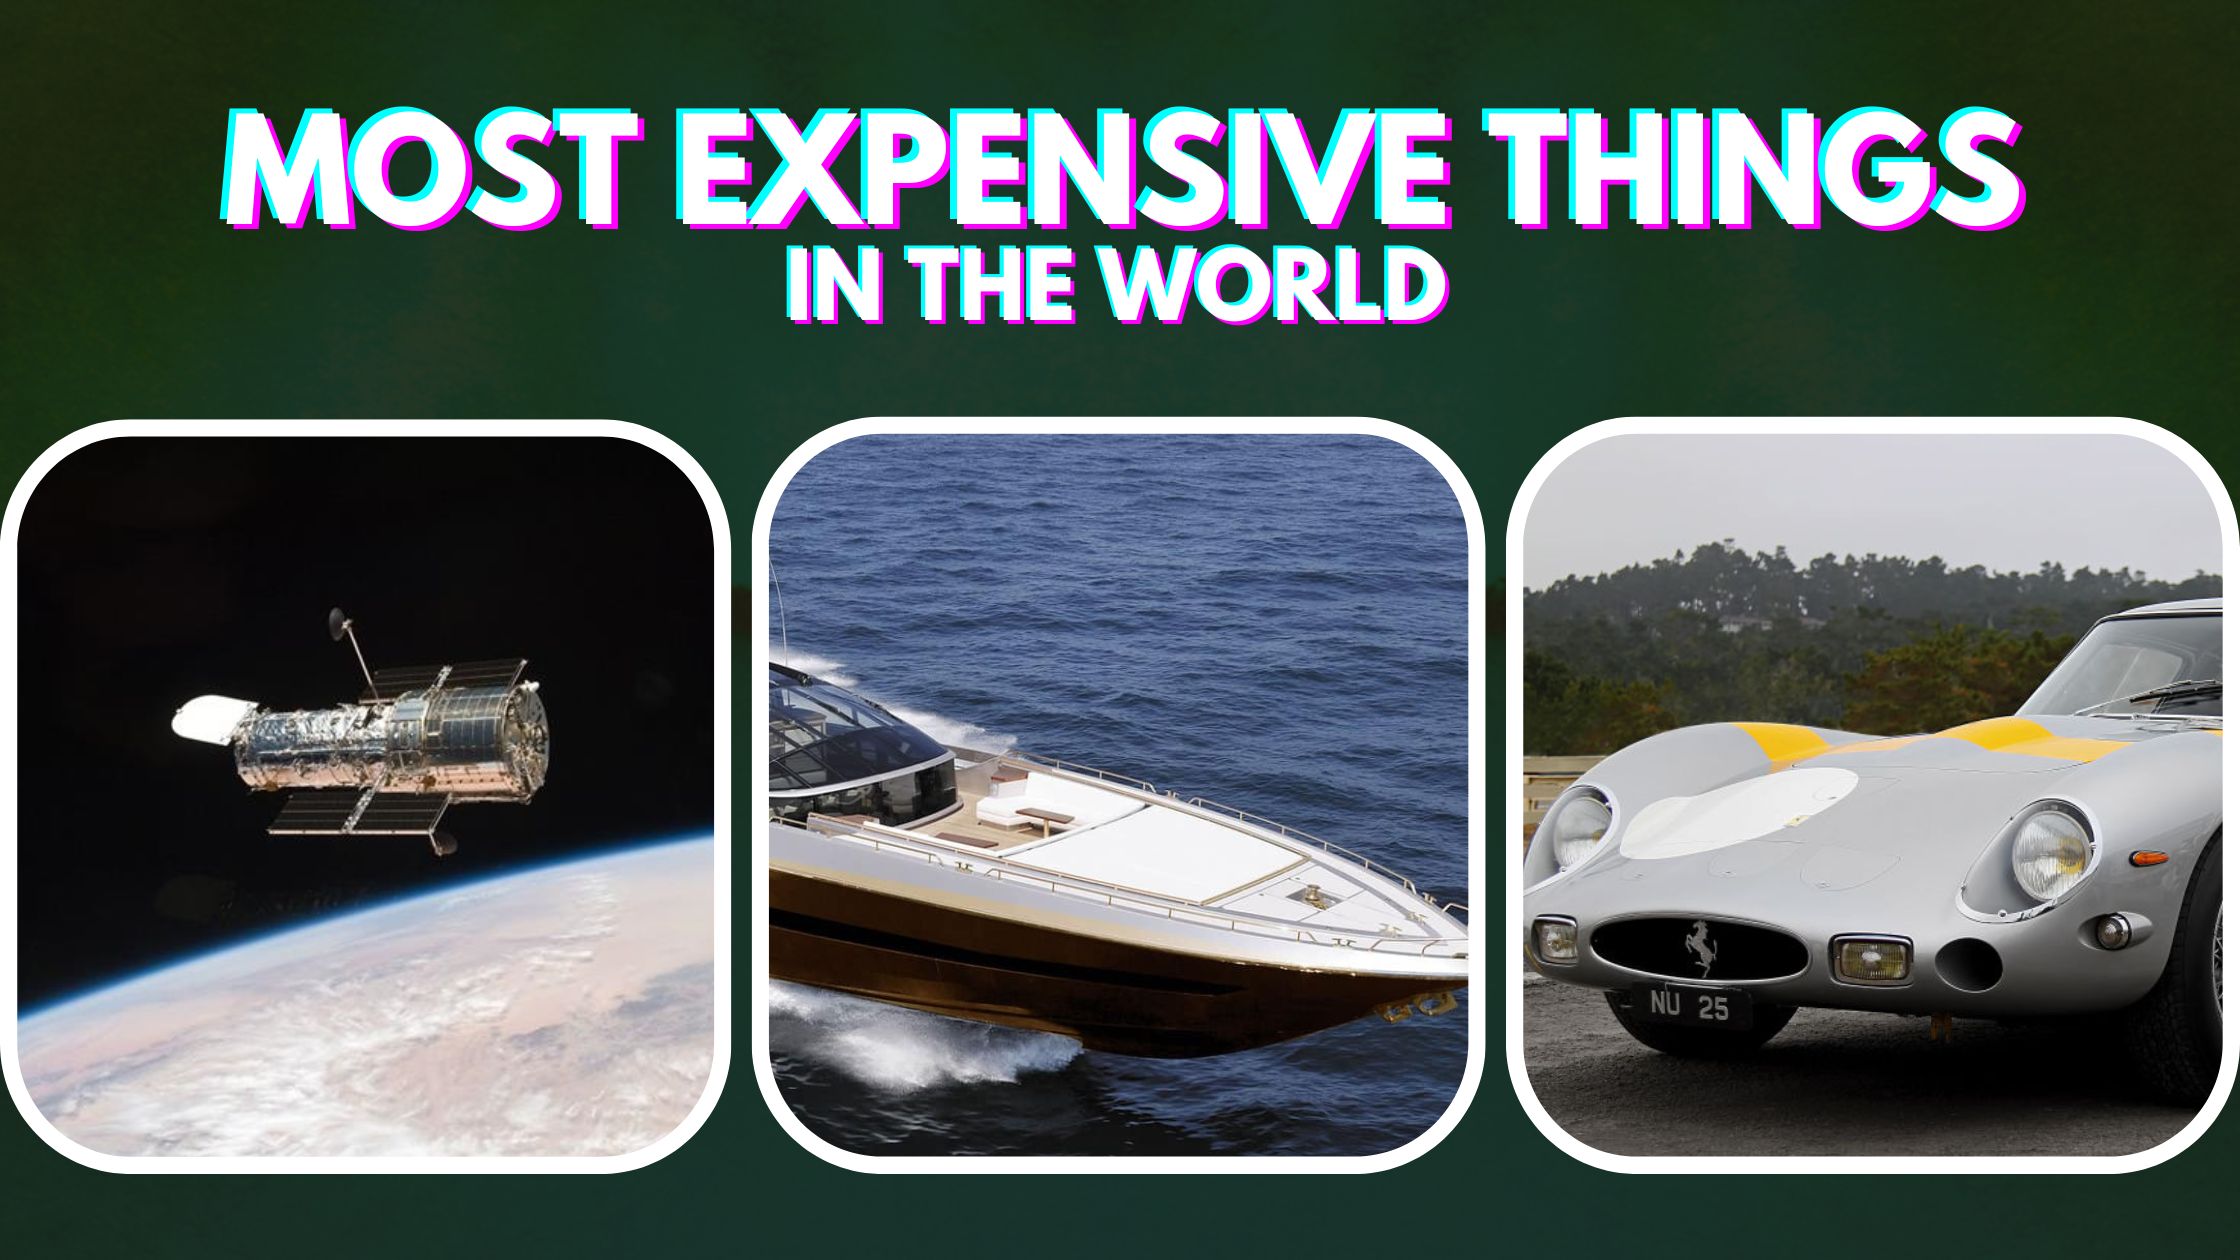 Top 10 most expensive items